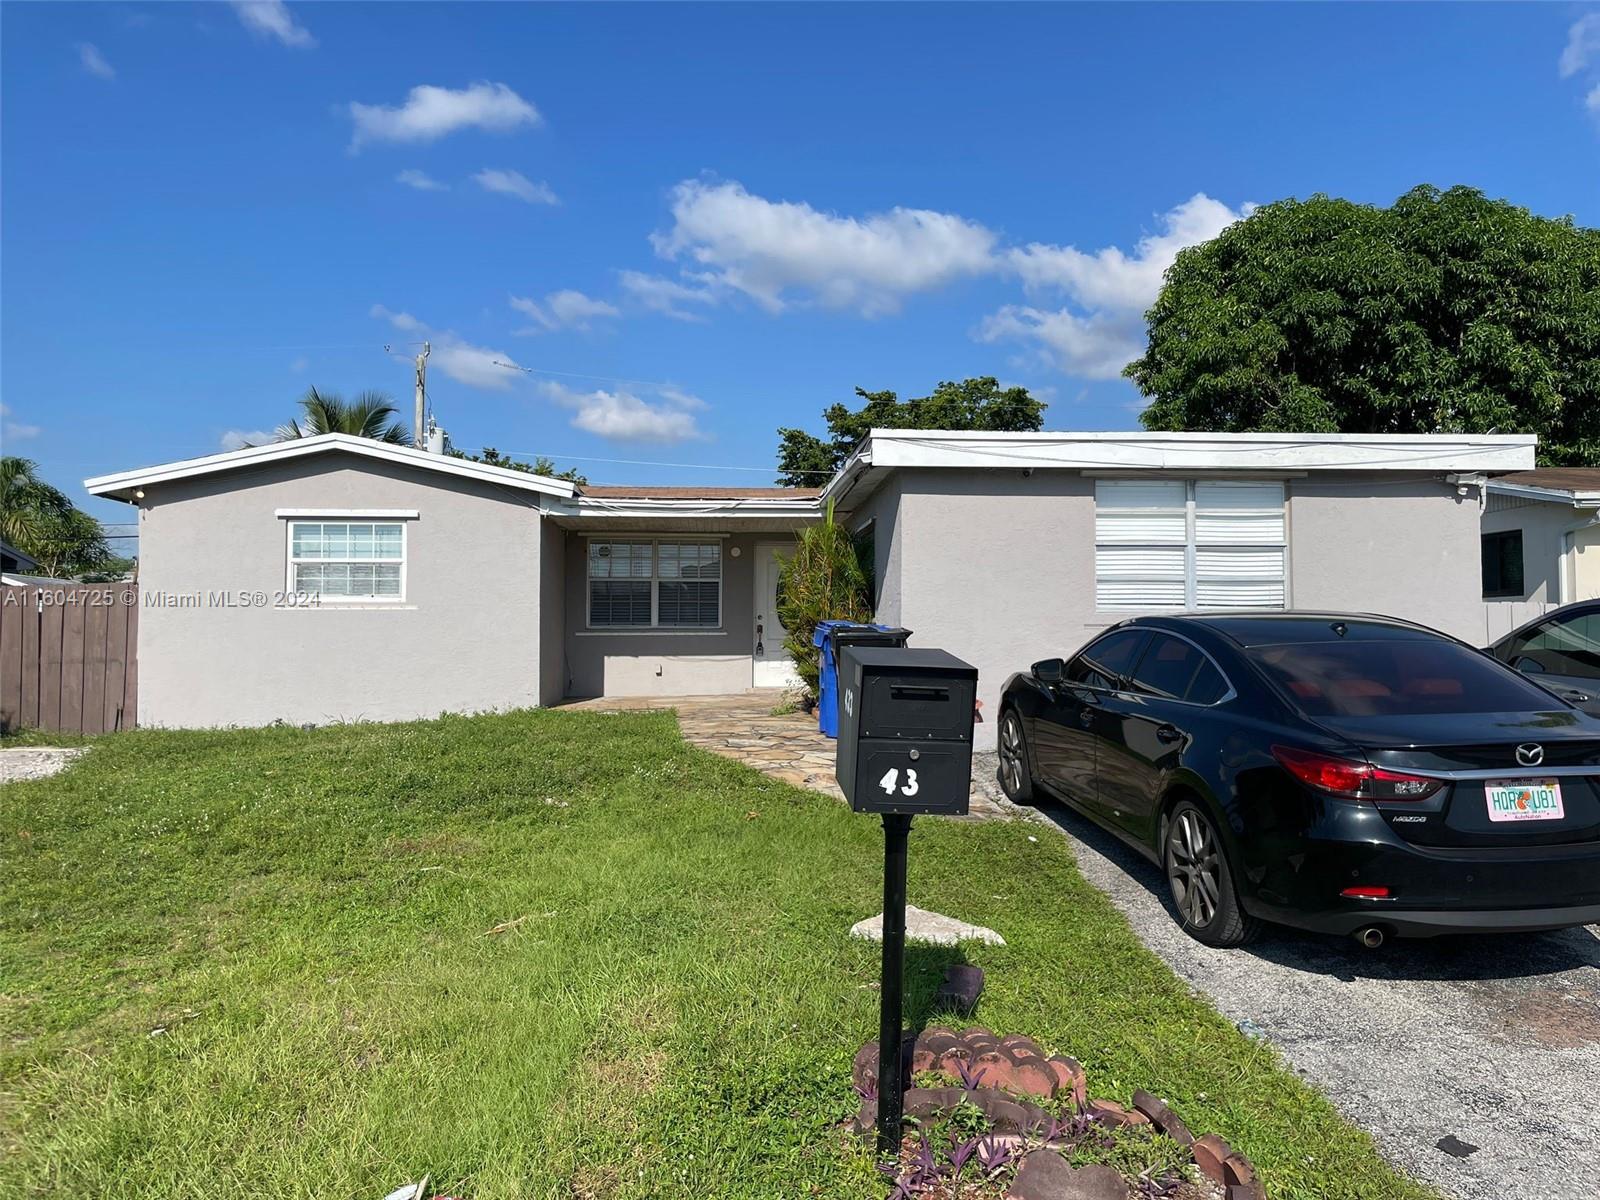 433 Sw 28th Ave 433, Fort Lauderdale, Broward County, Florida - 3 Bedrooms  
2 Bathrooms - 